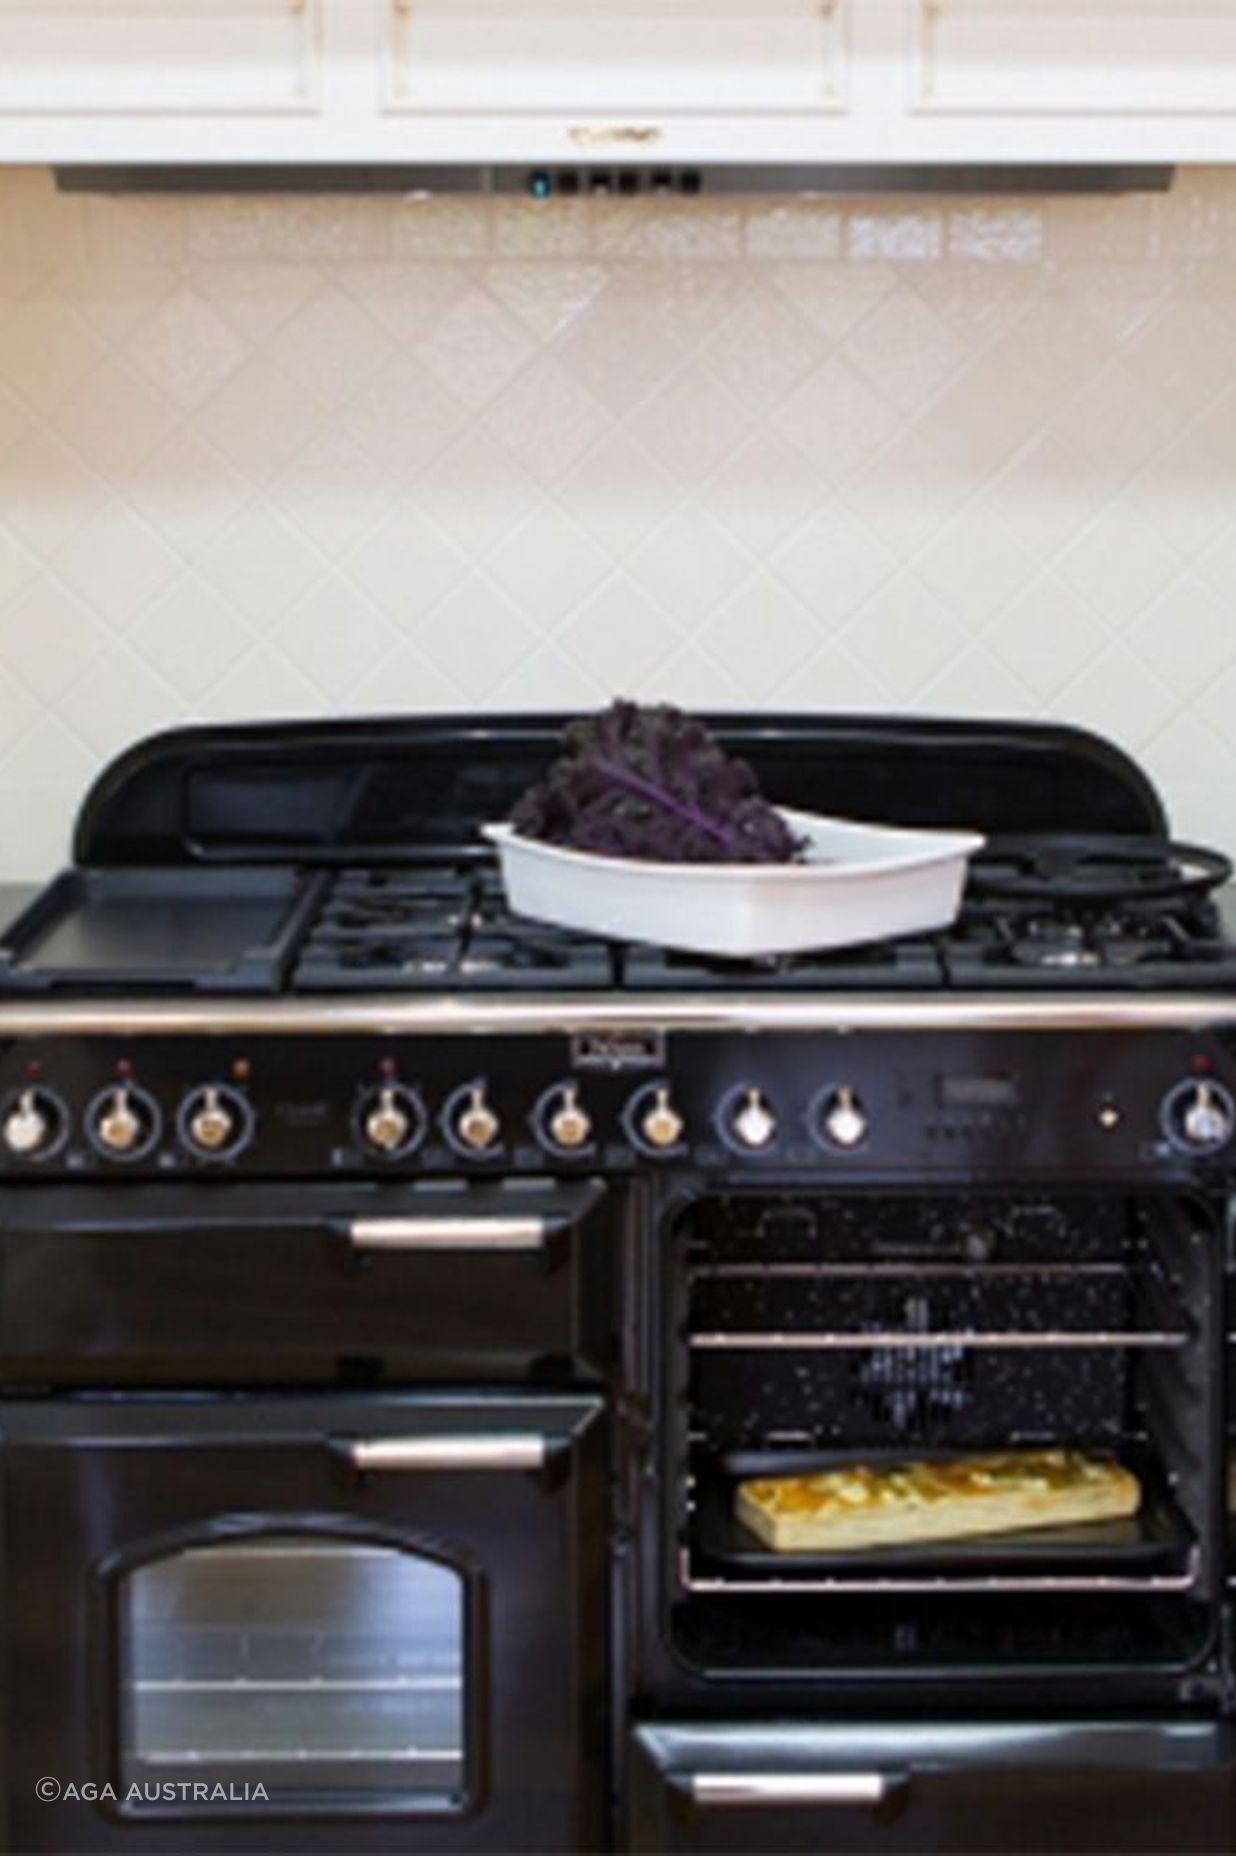 With its slow and steady cooking process, the AGA encourages a more mindful approach to cooking.